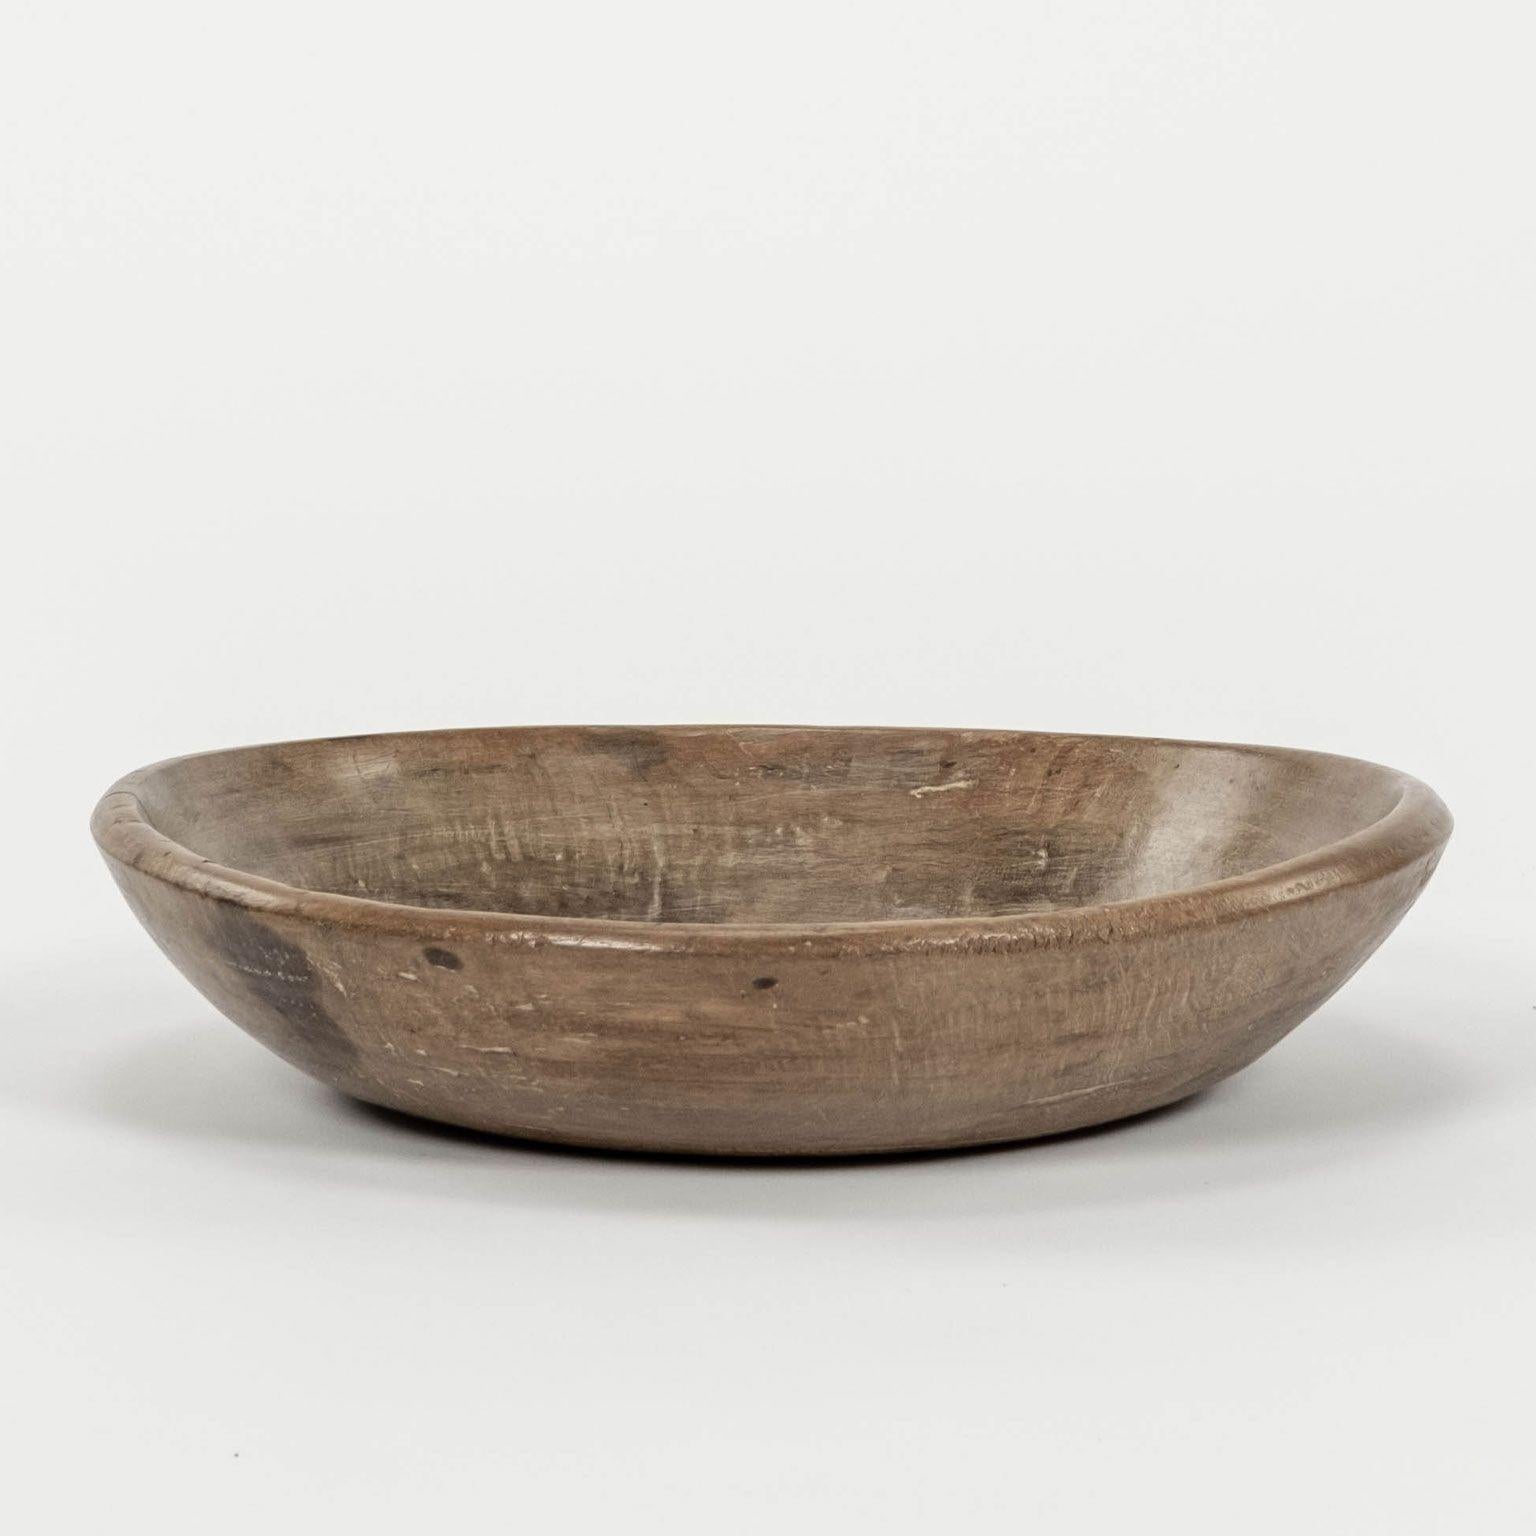 Rustic Swedish turned wooden bowl in brown waxed finish.